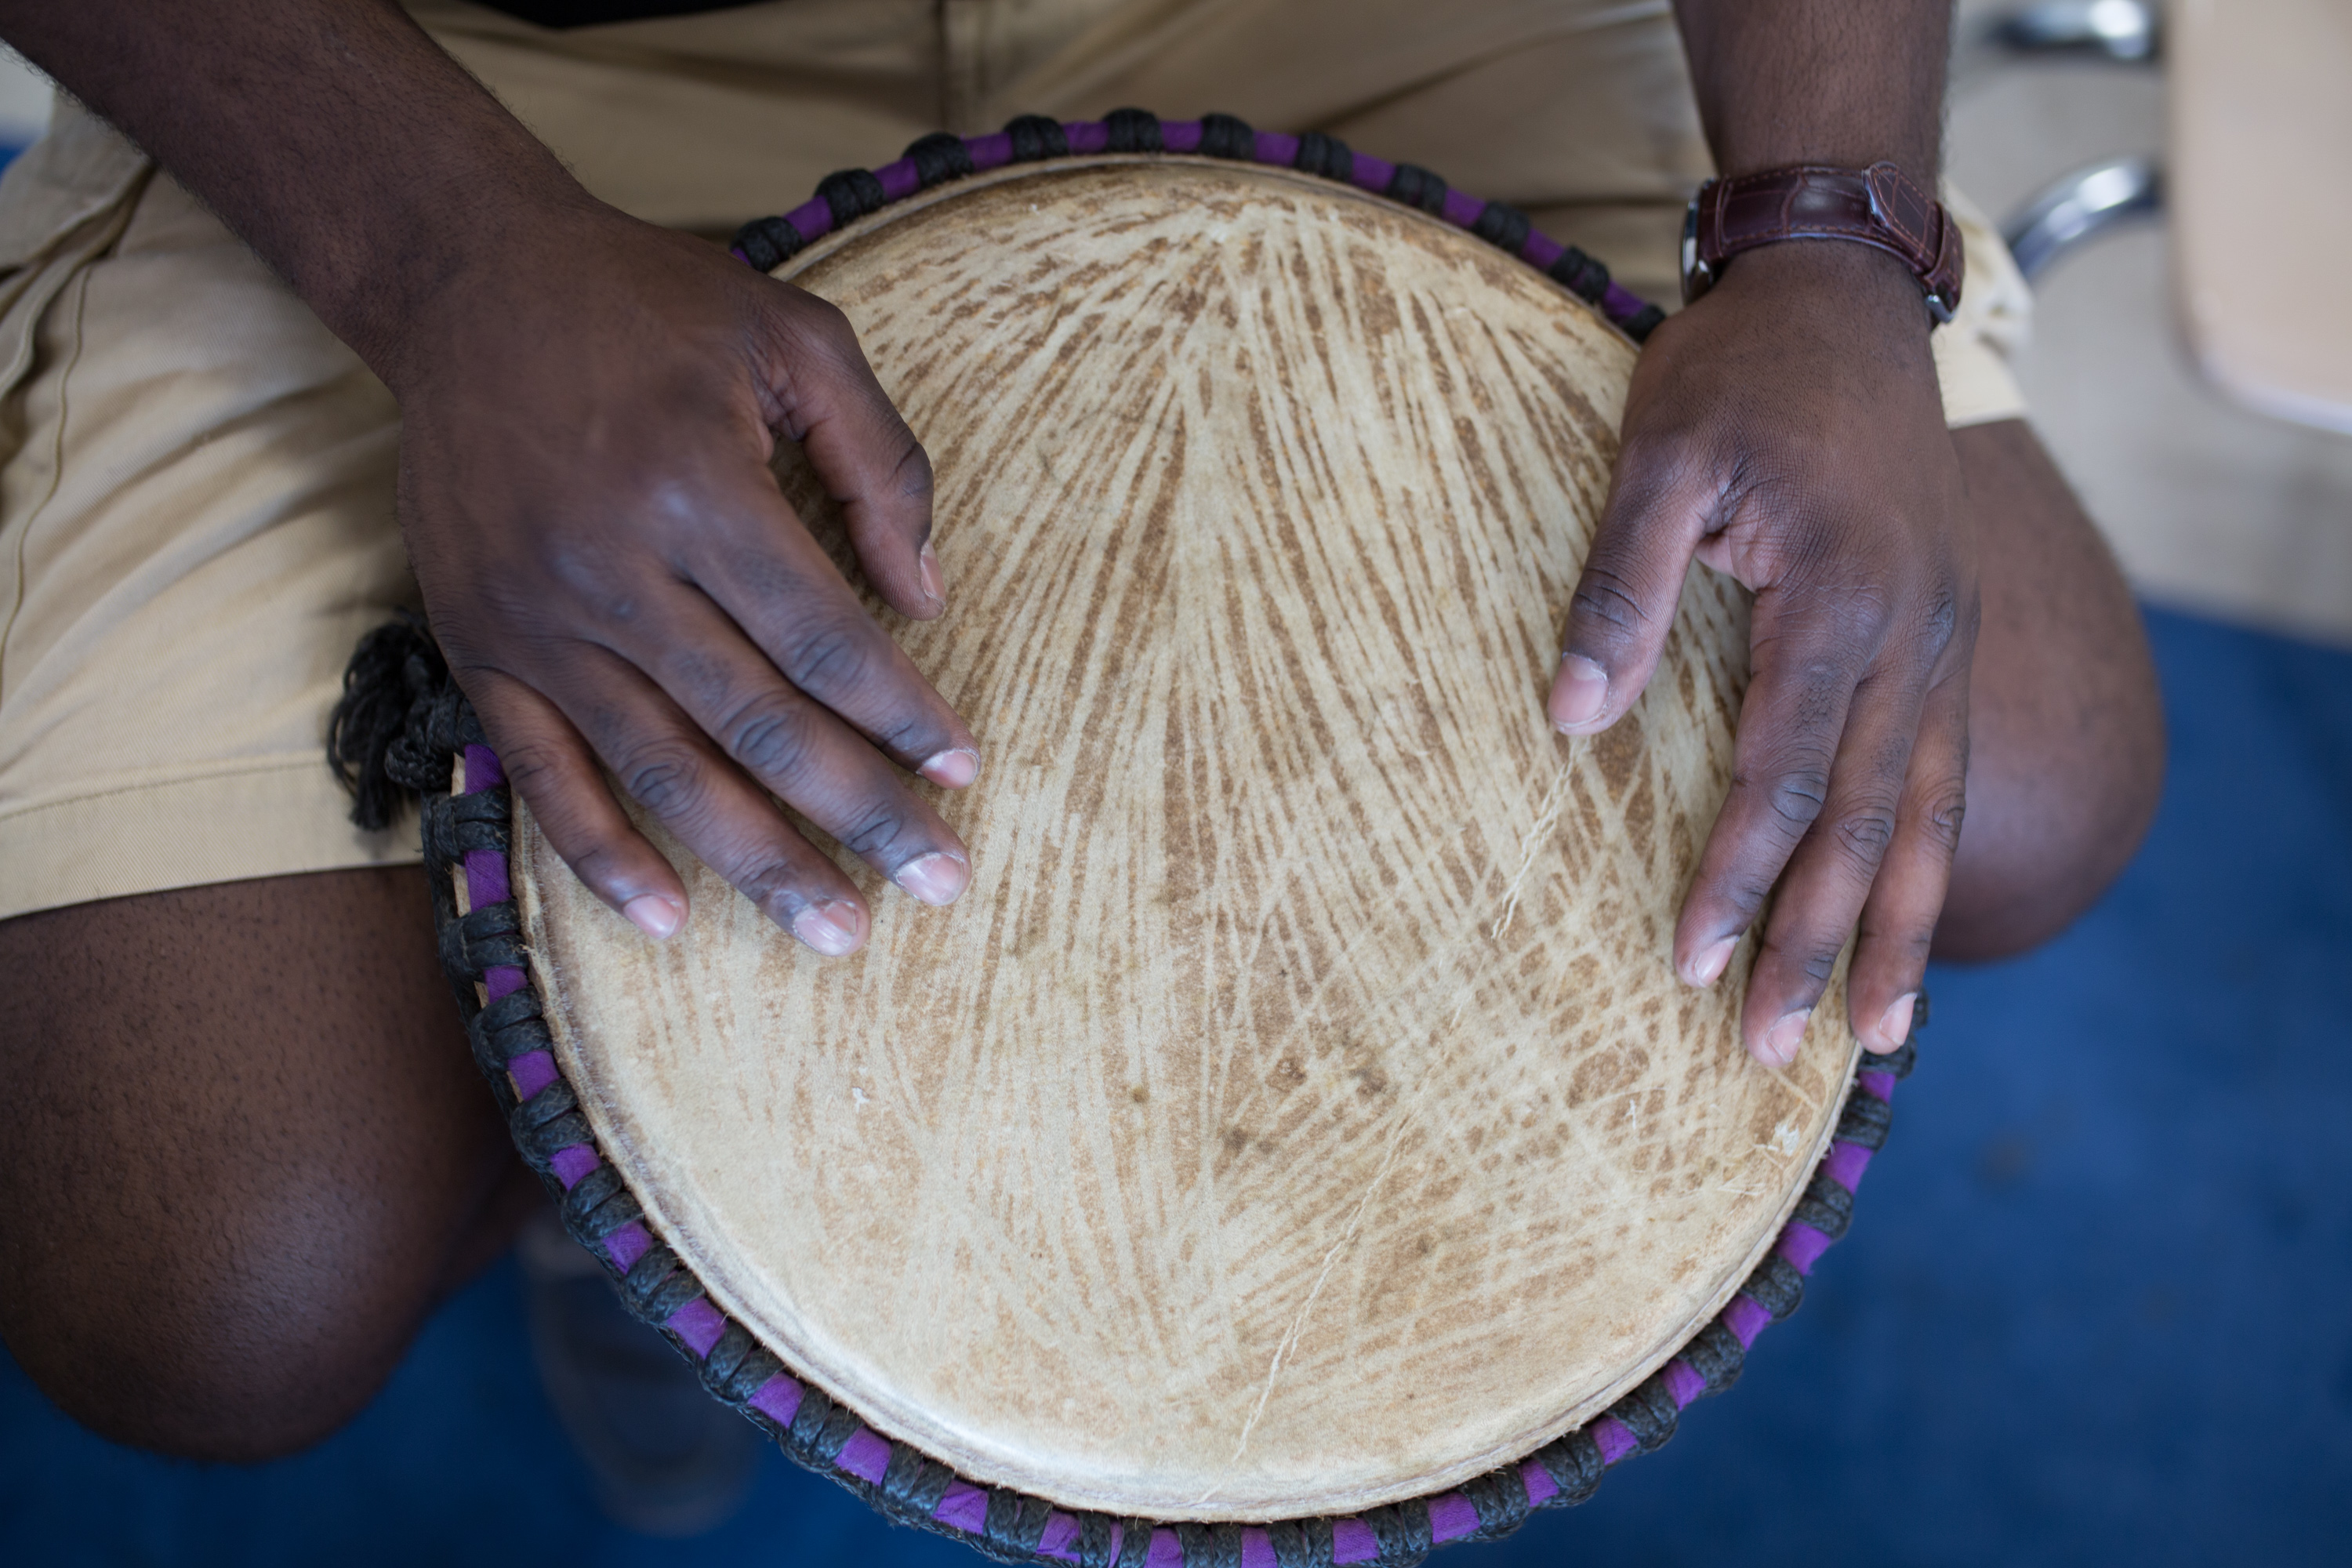 Jonathan Mande's hands on one of his traditional African drums.